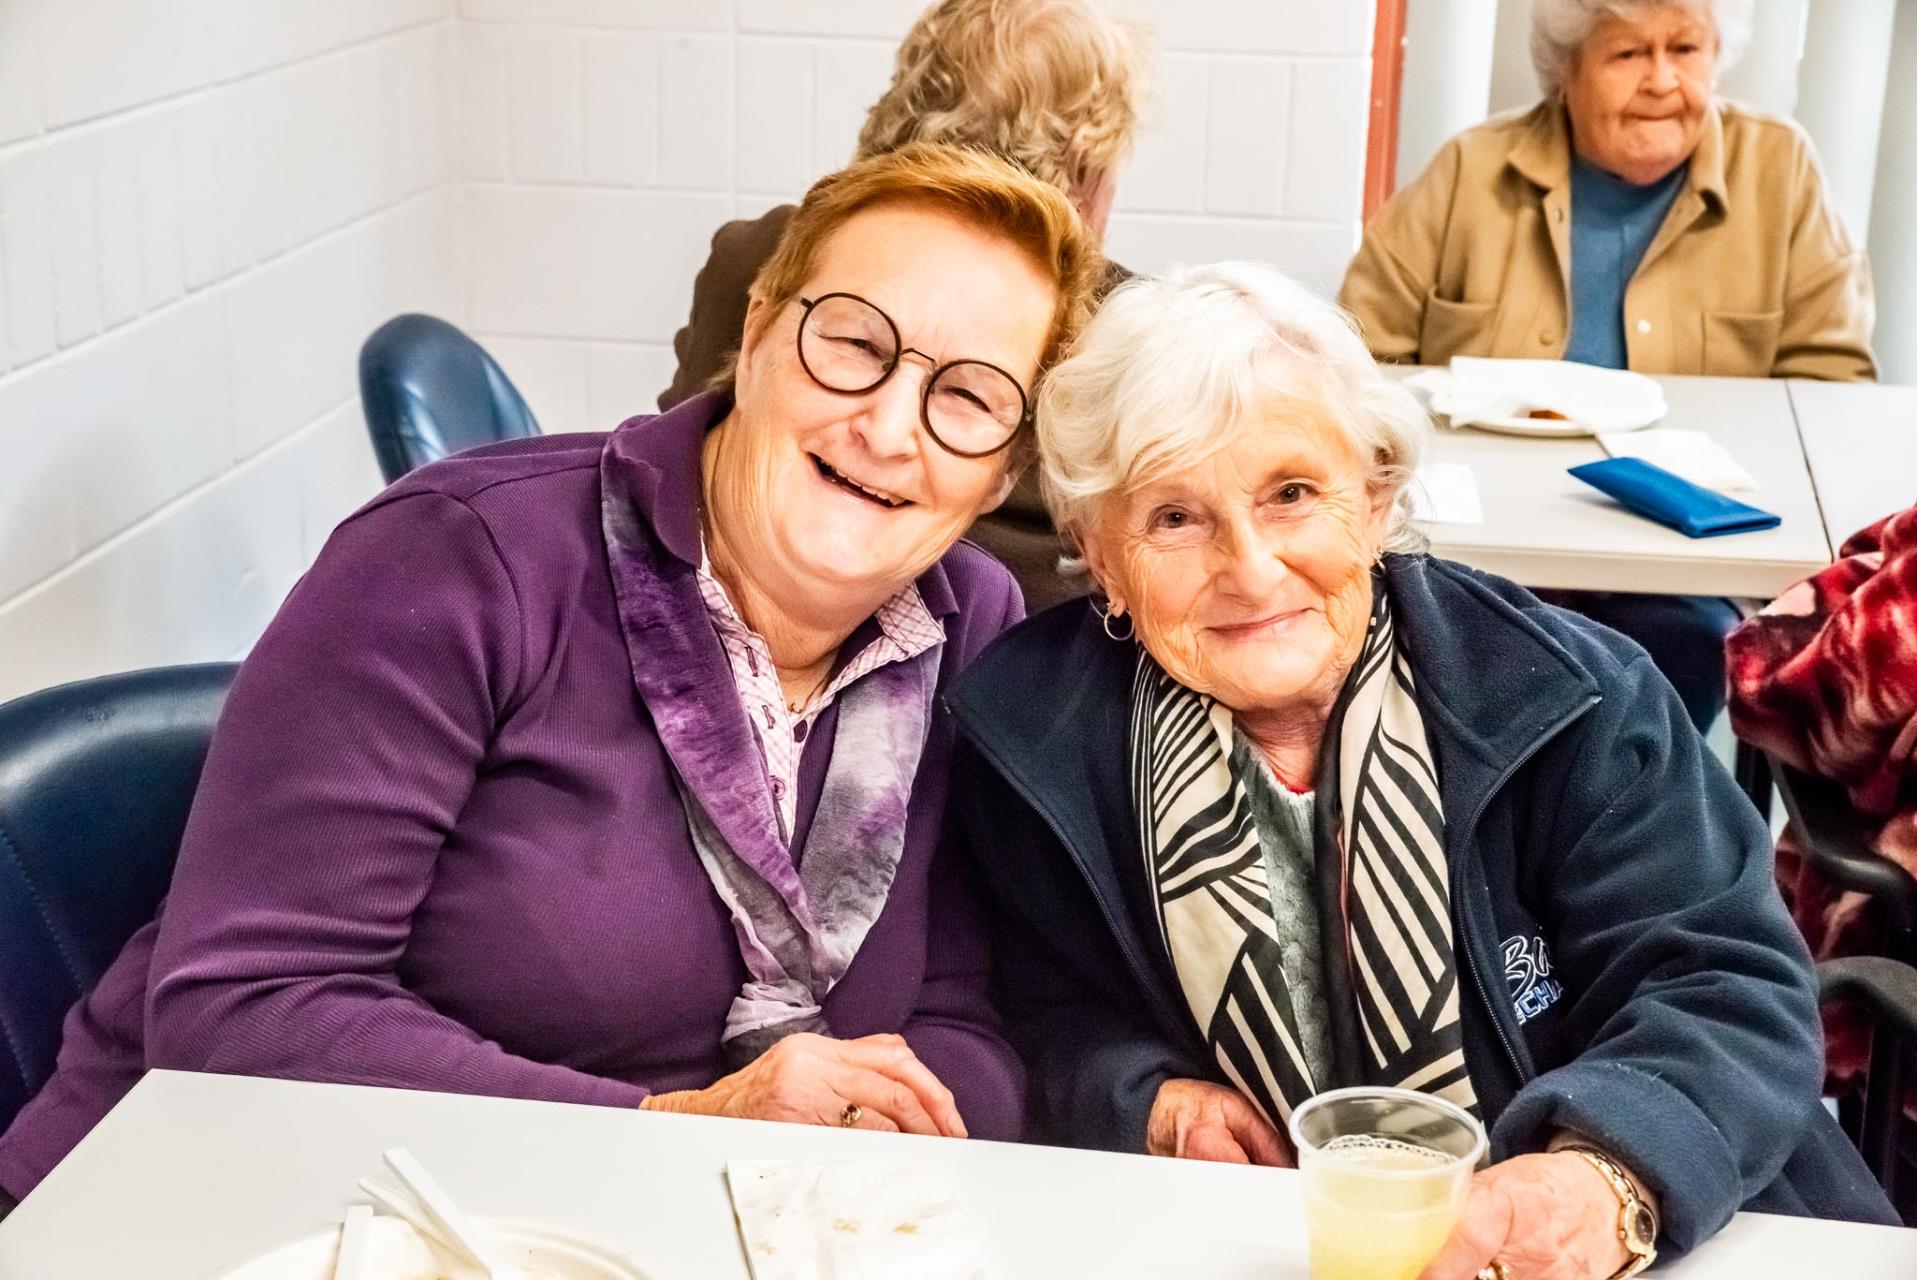 Seniors invited to embrace wellbeing at Seniors Expo